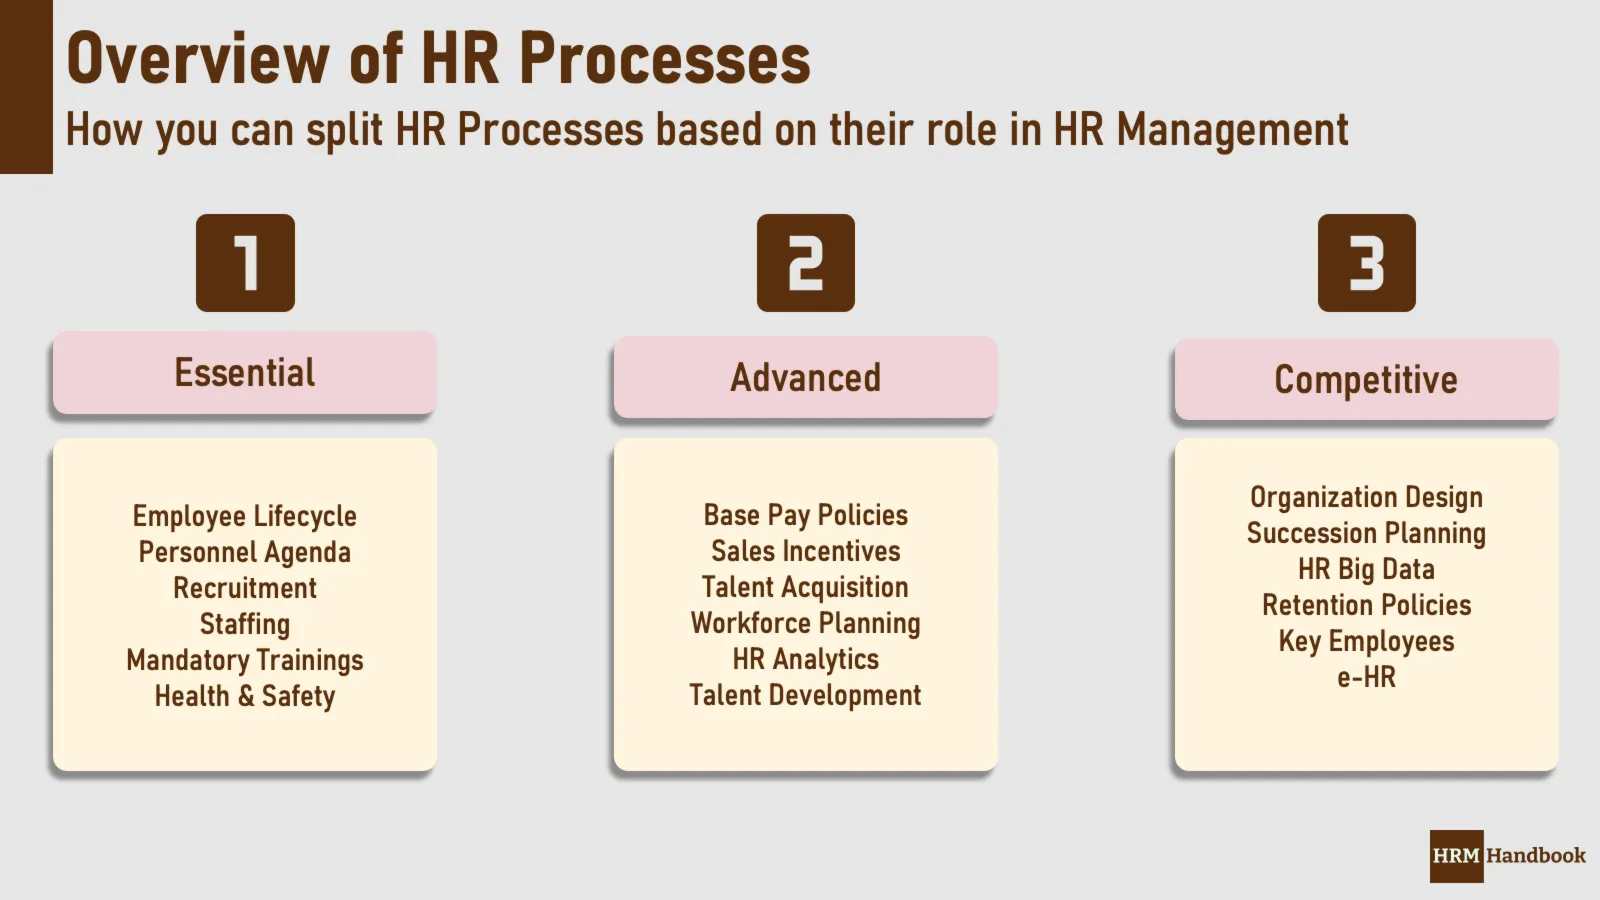 Overview of HR Processes including their tactical or strategic role in Human Resources Management